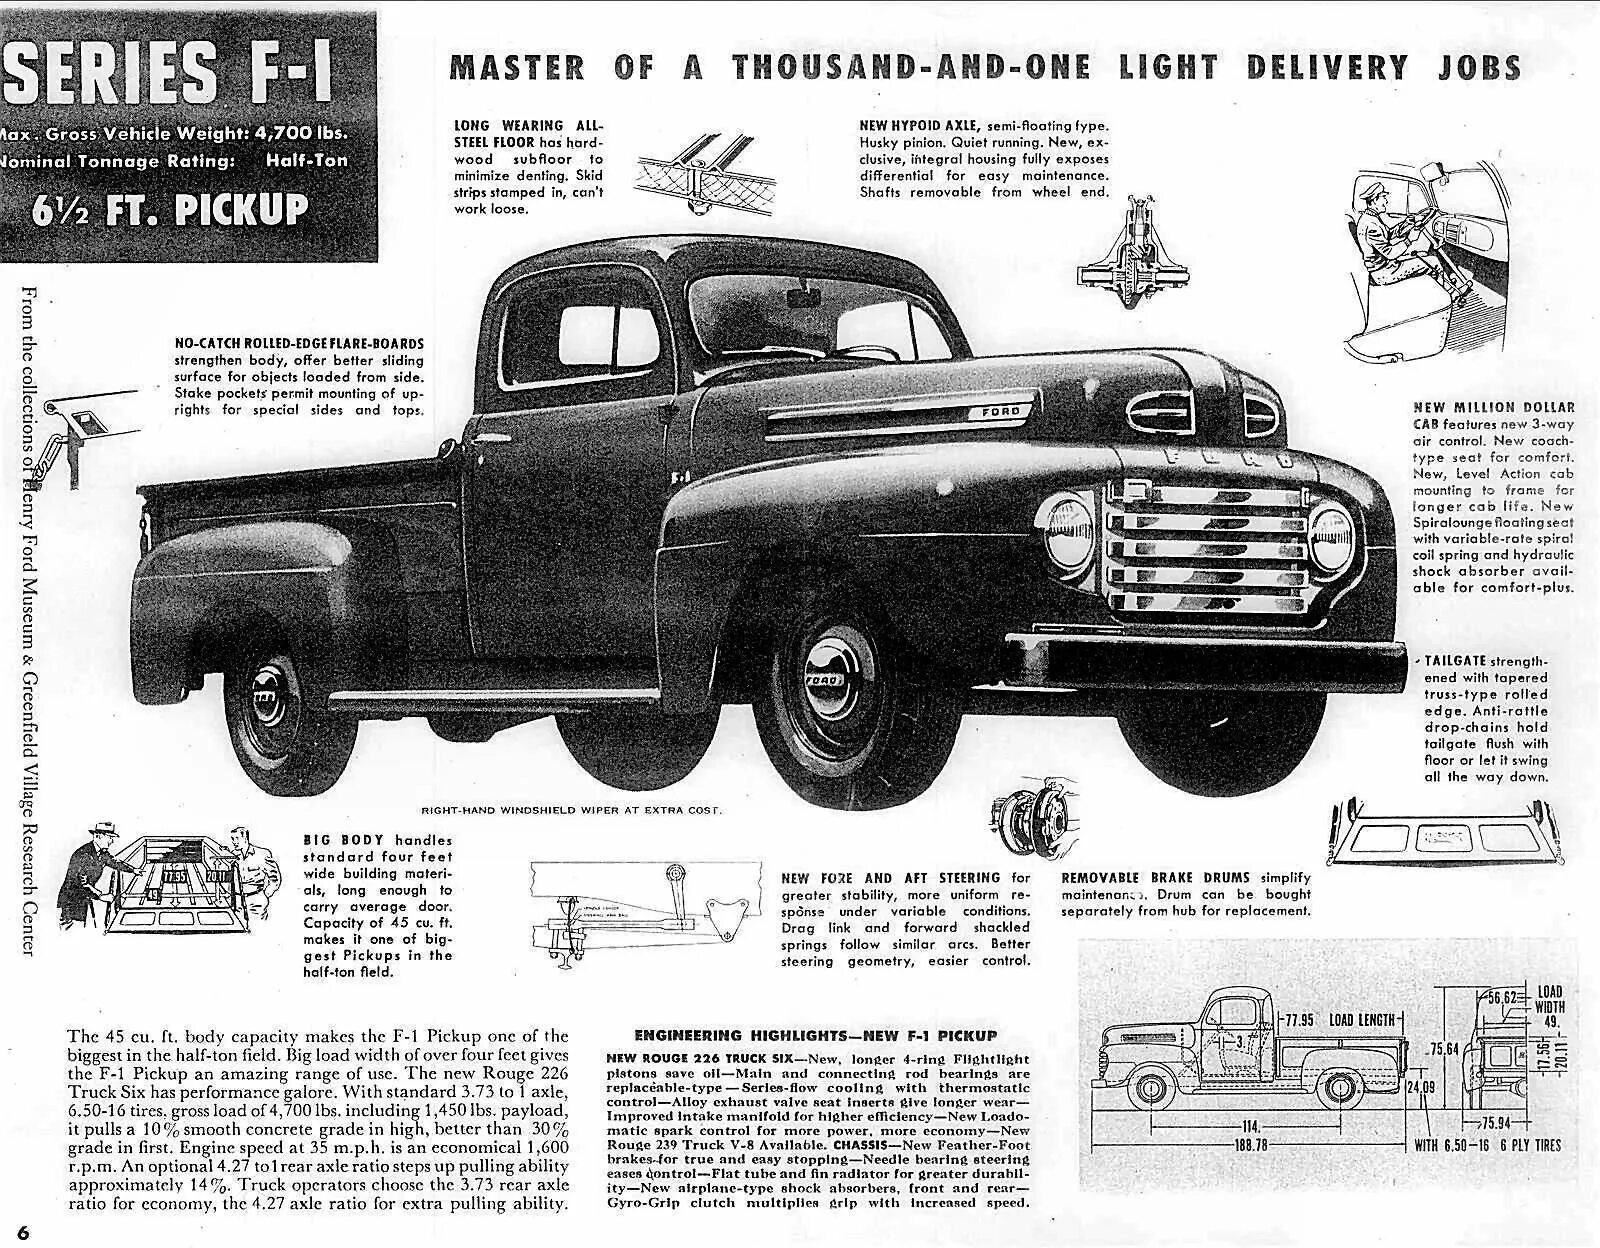 Ford f1 Pickup 1948. Ford Truck 1948. Форд пикап 1948 реклама. Ford f1 1948 год.